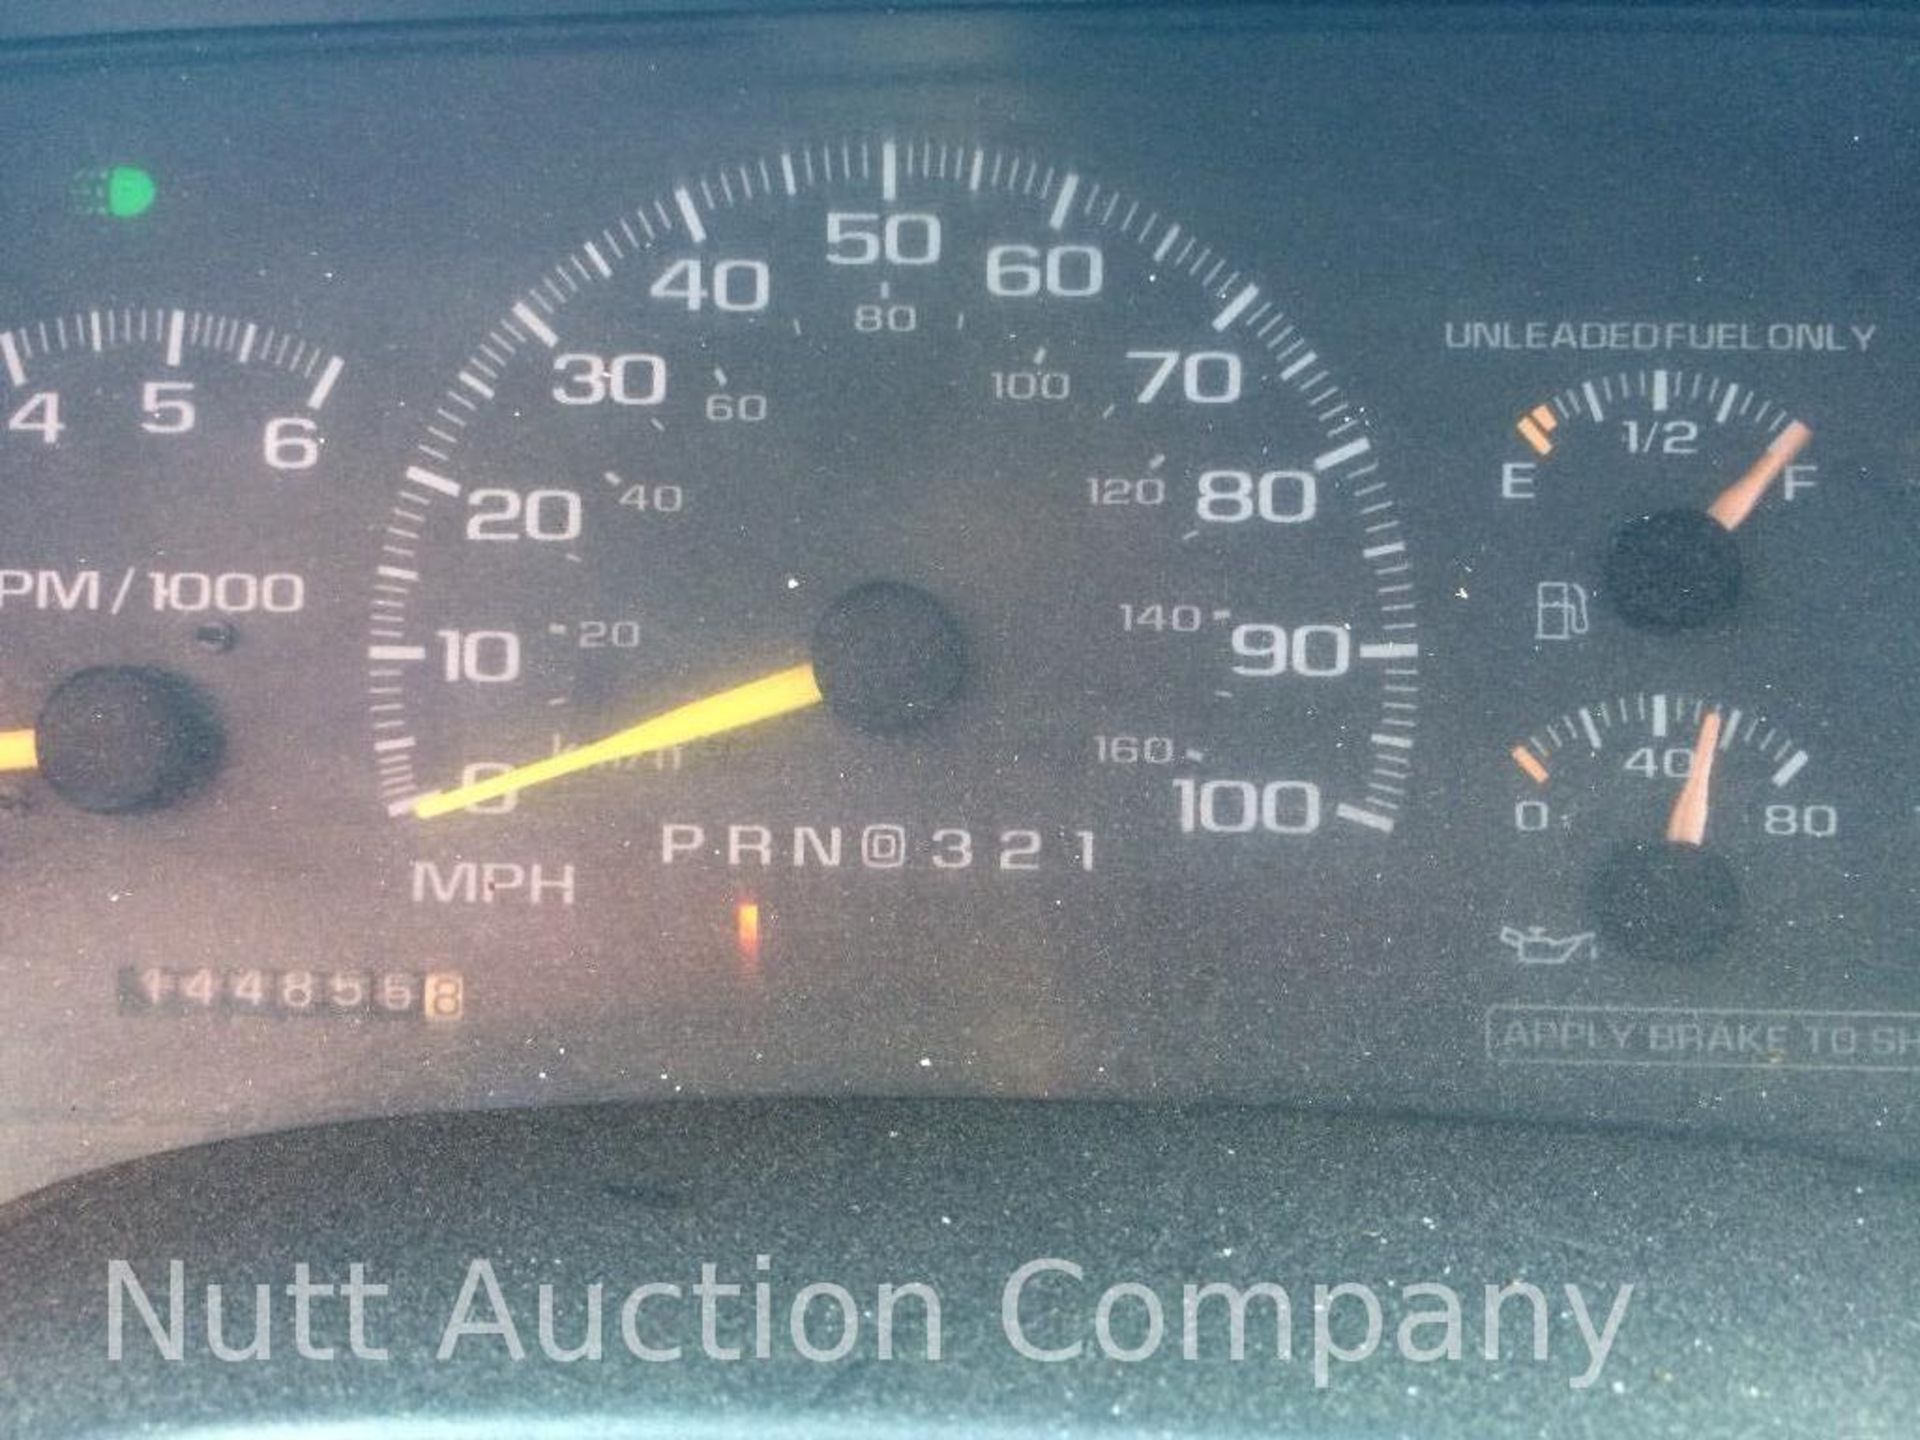 1998 Chevrolet C2500 Truck Mileage: 144,855, Body Type: 2 Door, Cab; Extended, Trim Level: Base, - Image 5 of 15